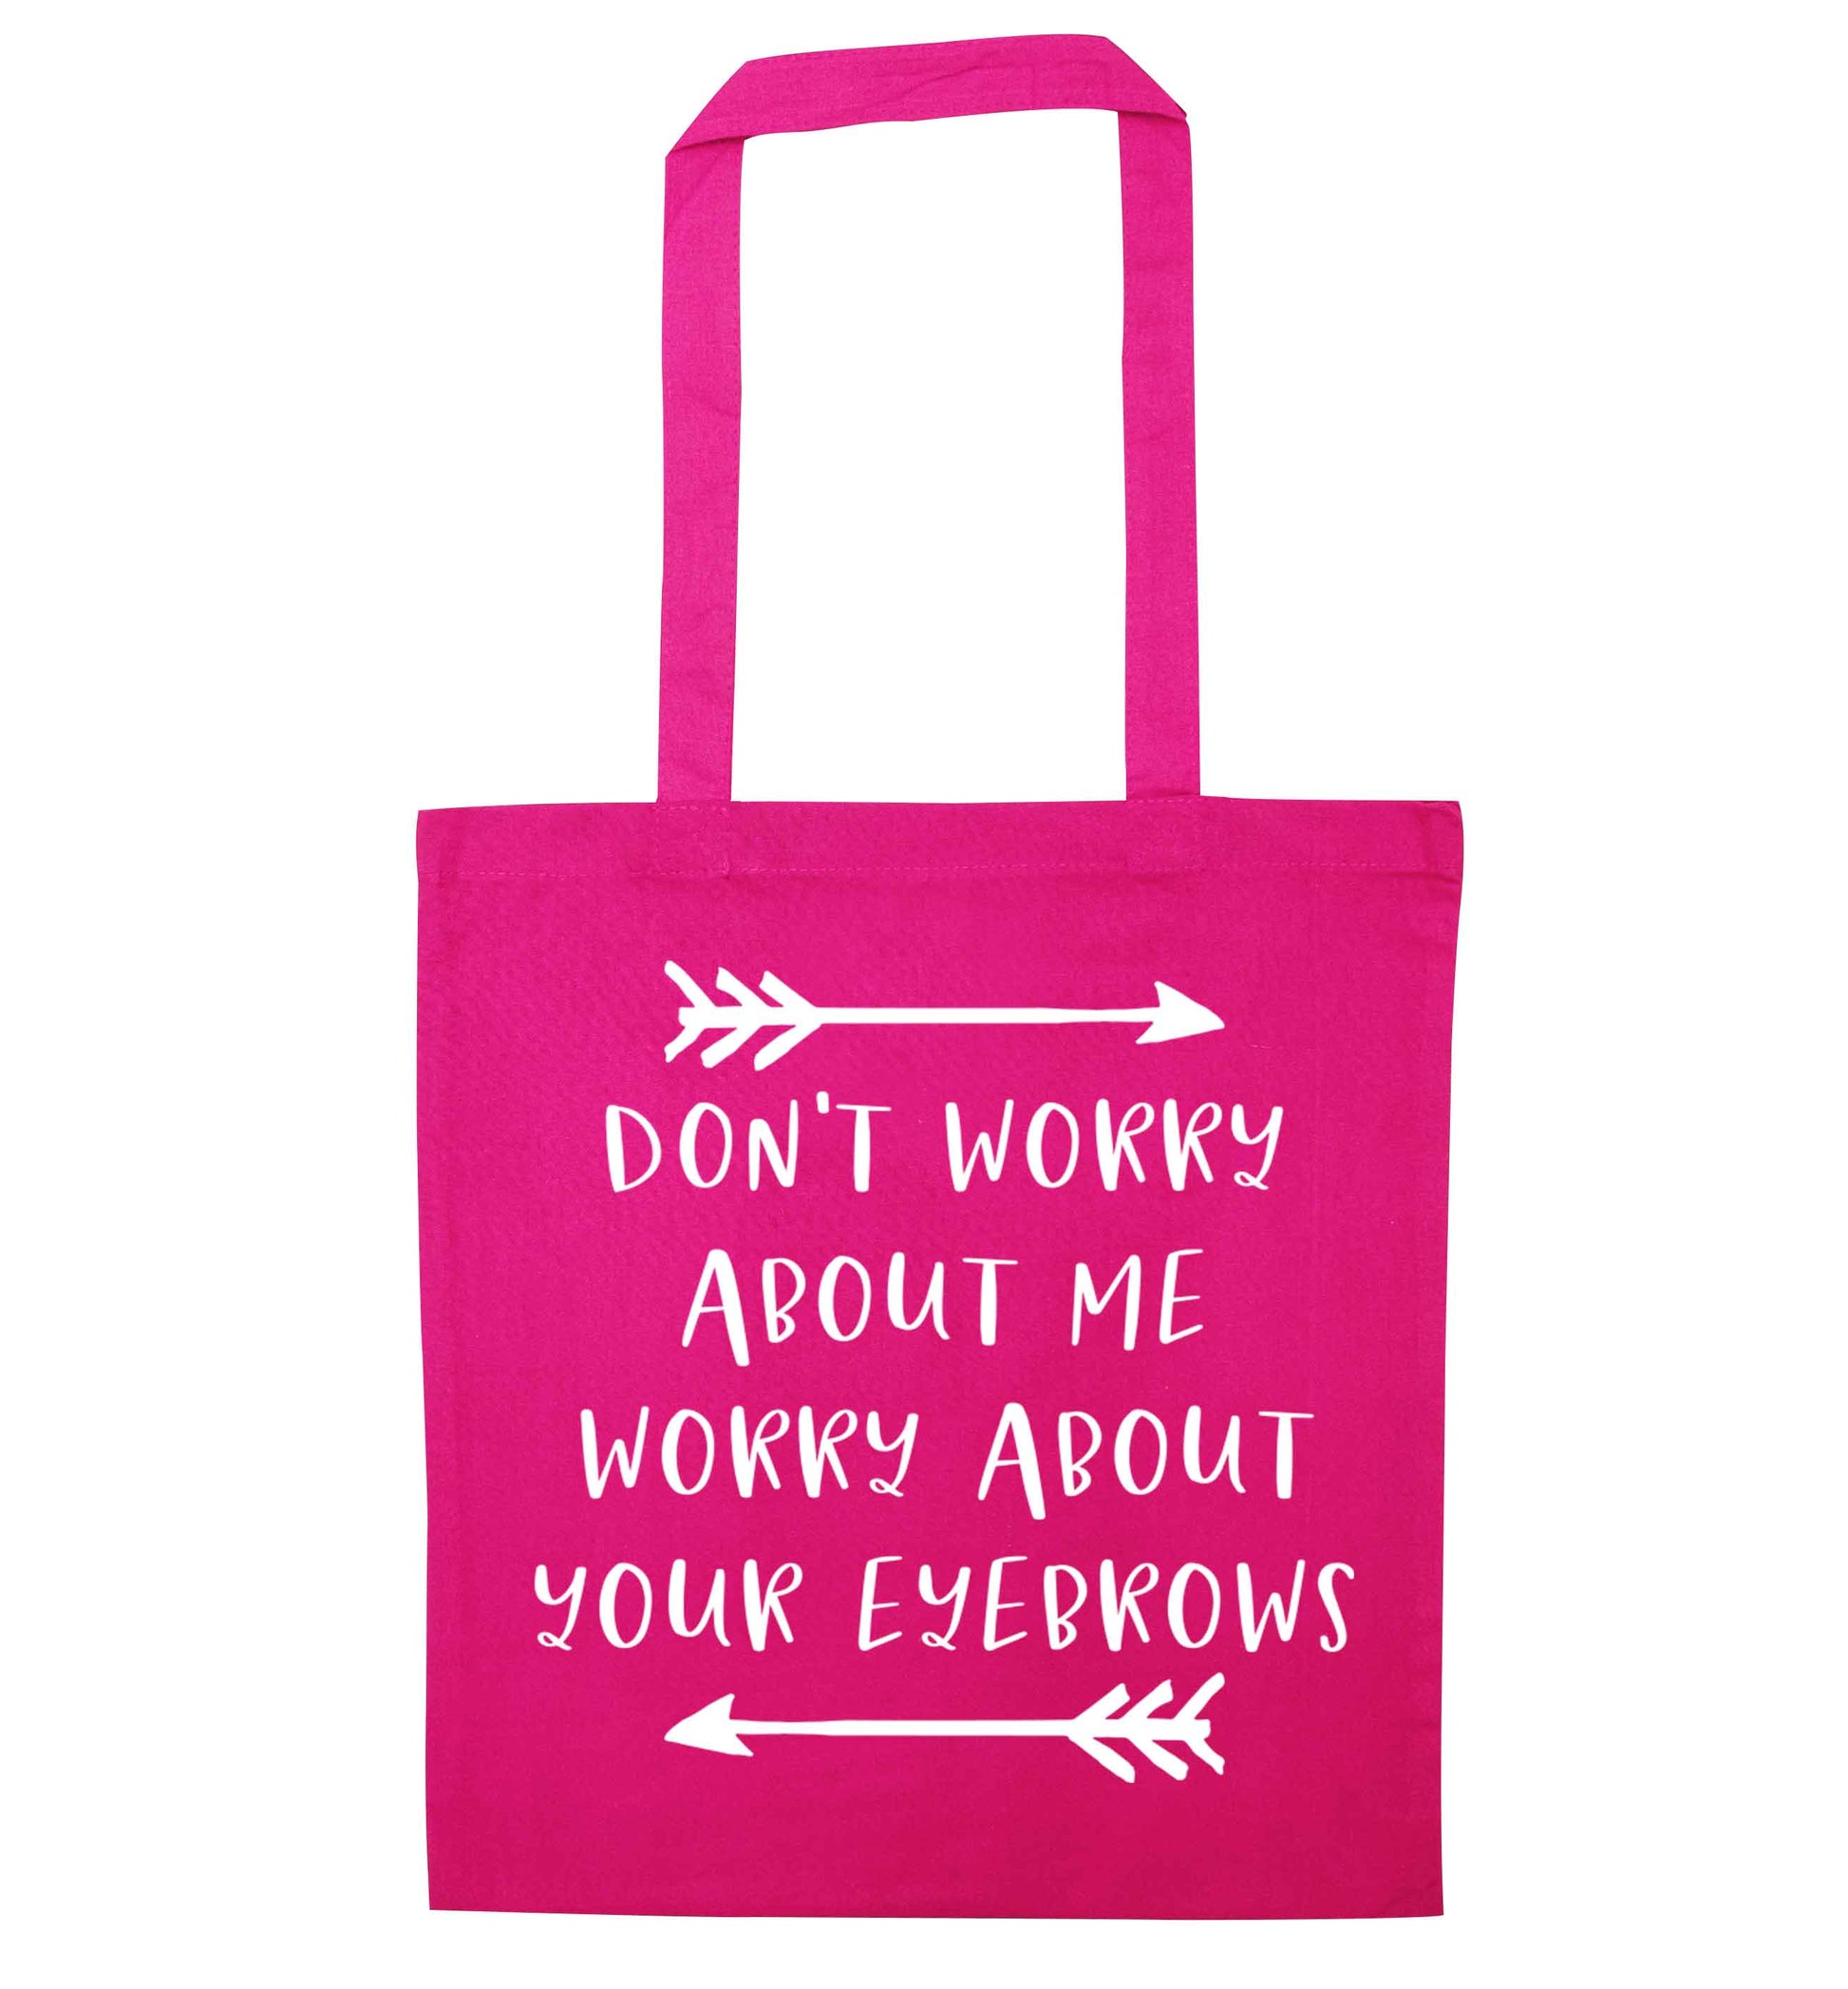 Don't worry about me worry about your eyebrows pink tote bag